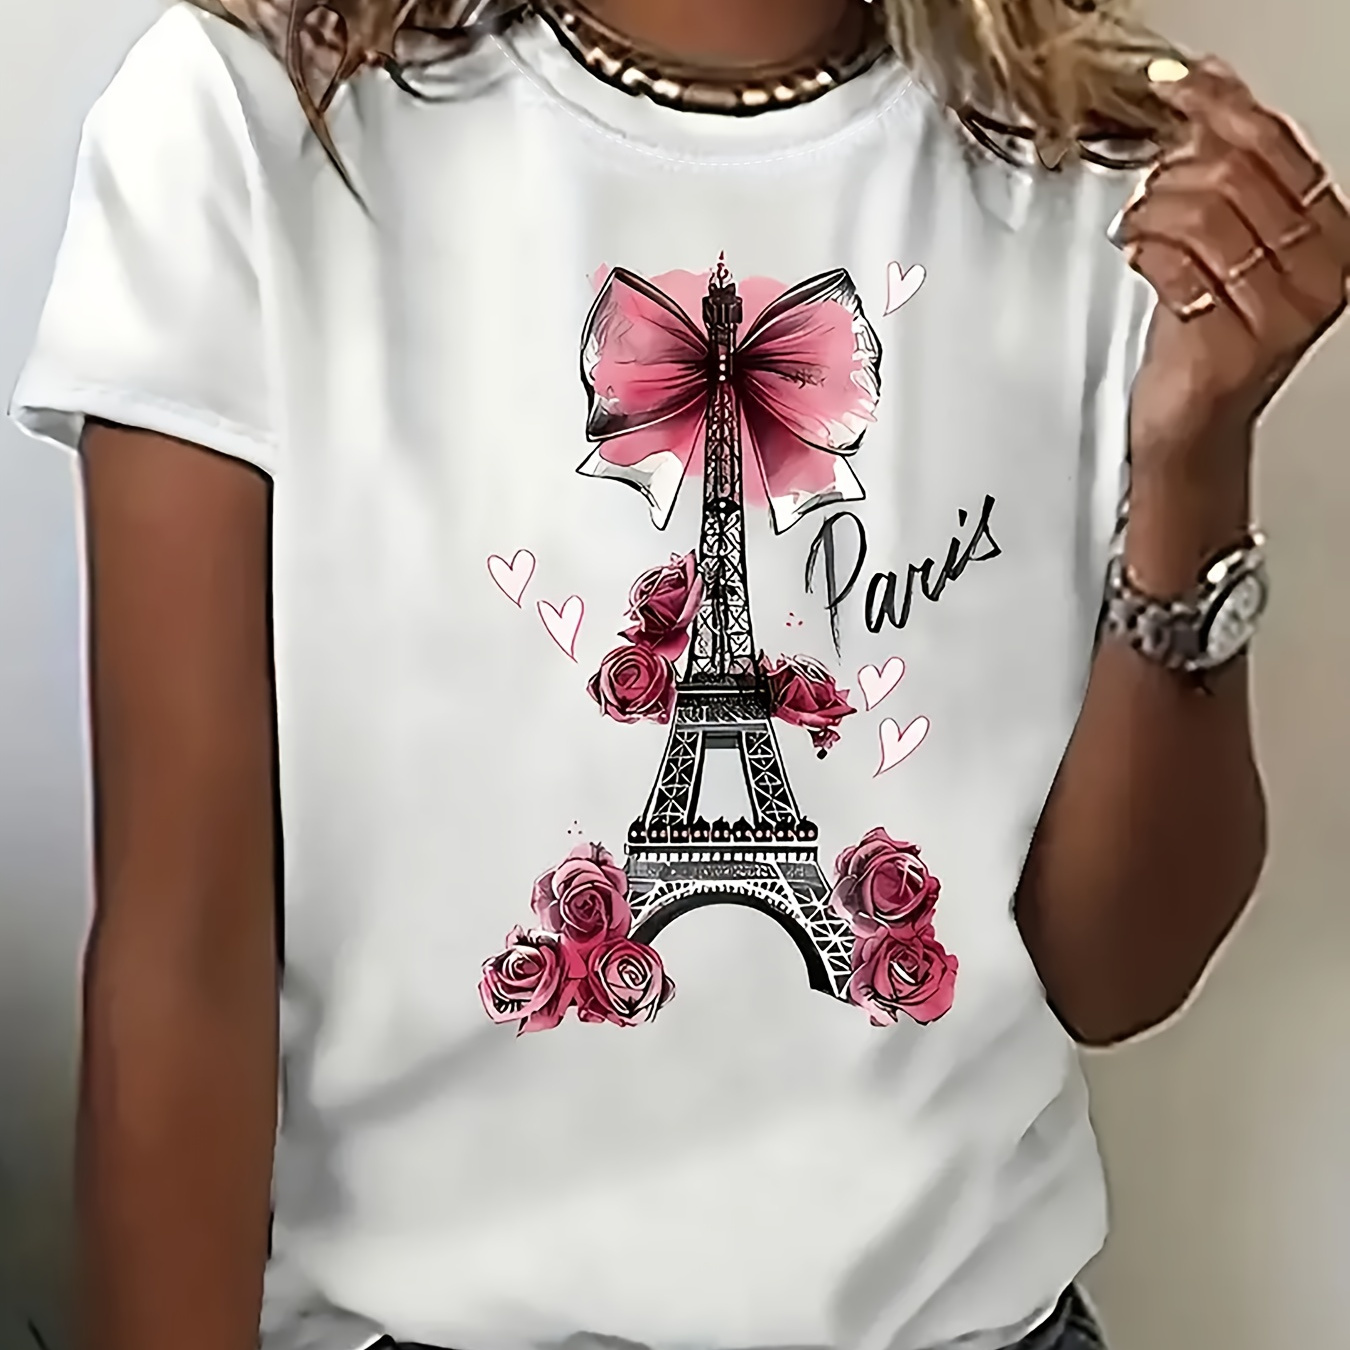 

Paris Eiffel Tower Print T-shirt, Casual Crew Neck Short Sleeve Top For Spring & Summer, Women's Clothing